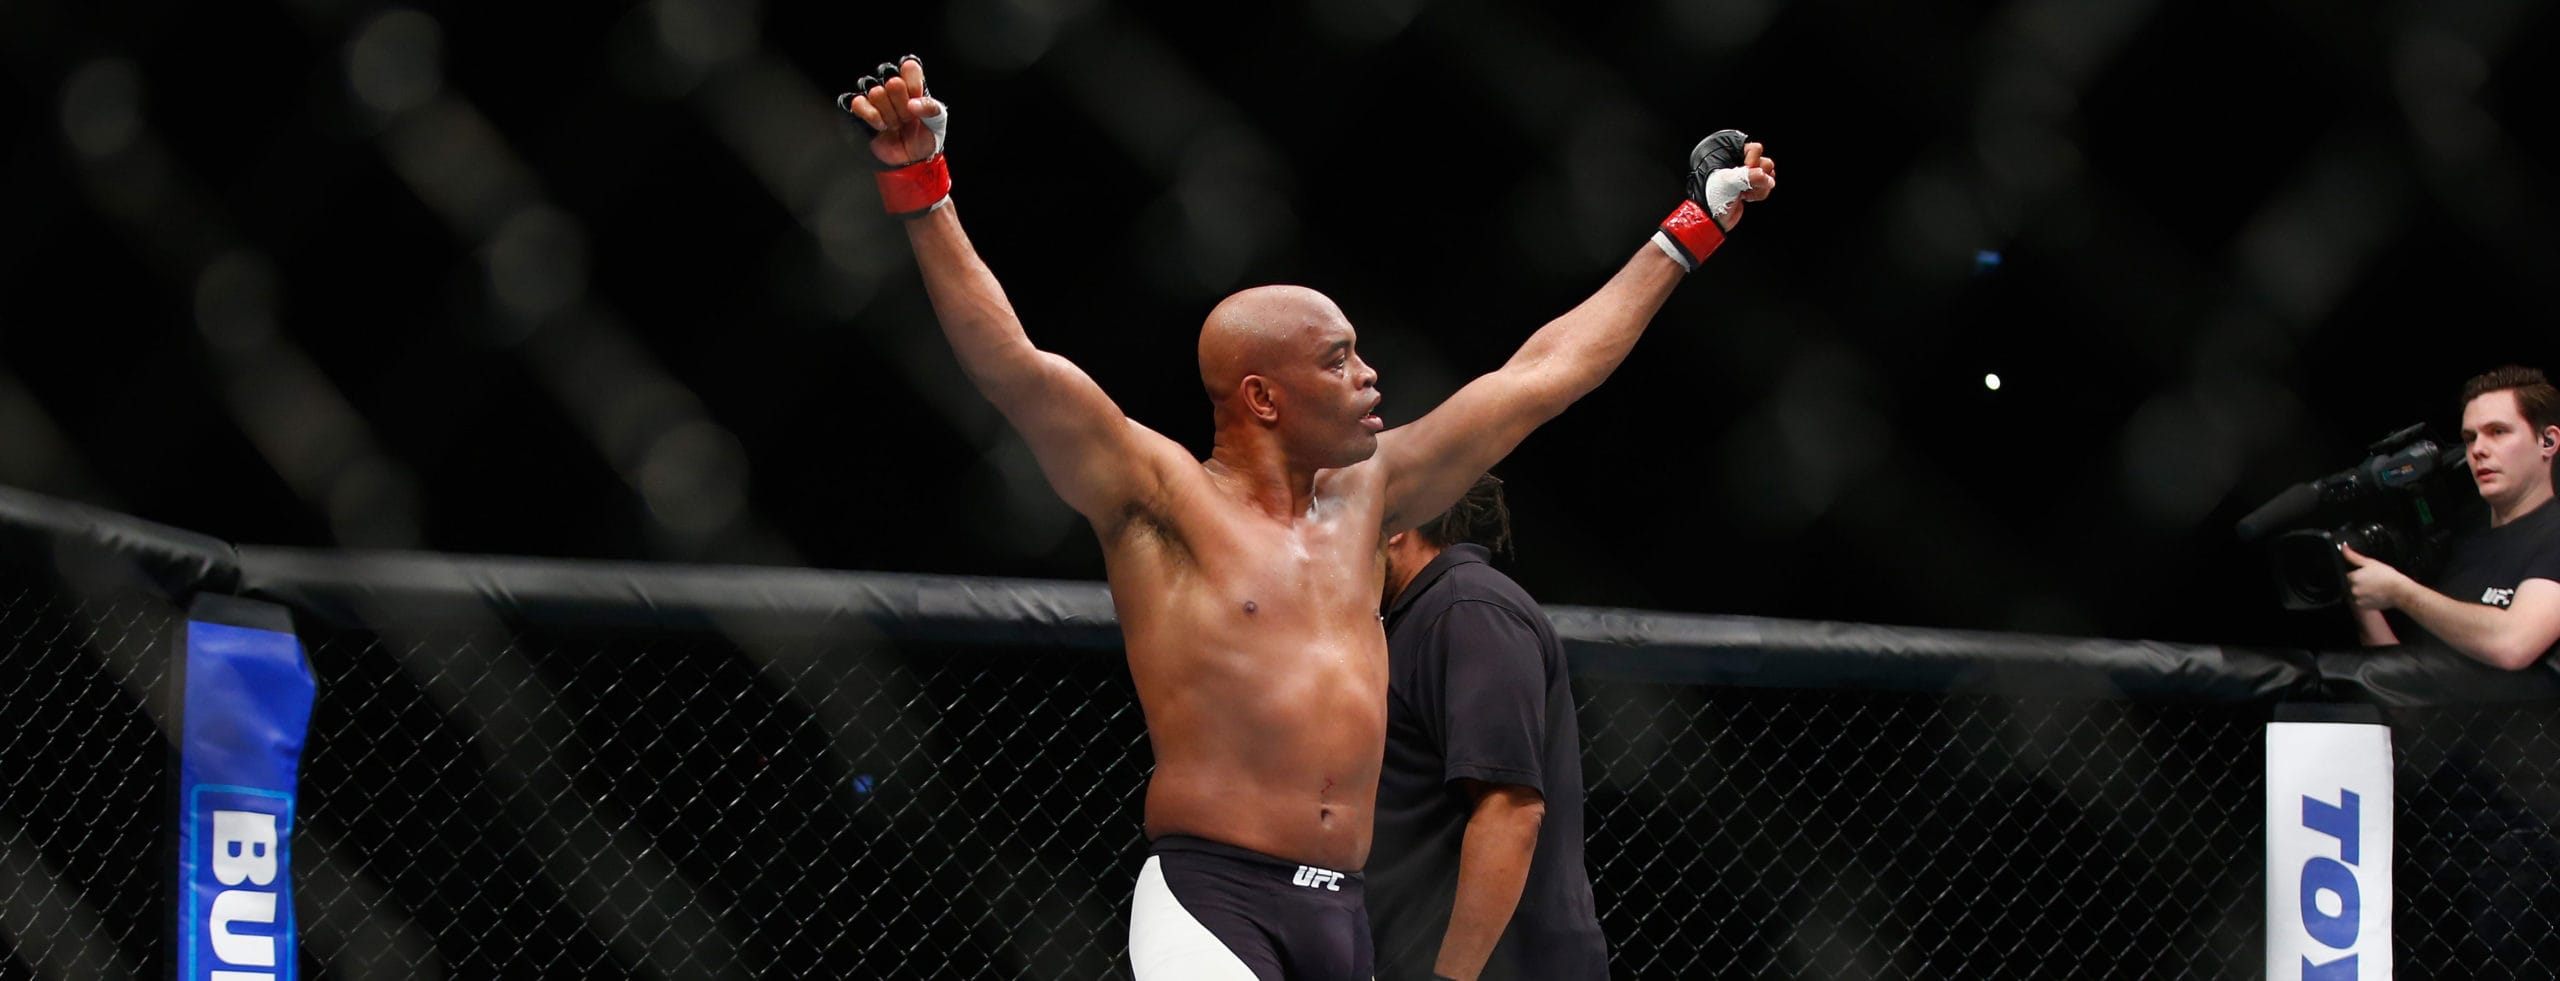 Analysis: Who have been the longest-reigning UFC champions?